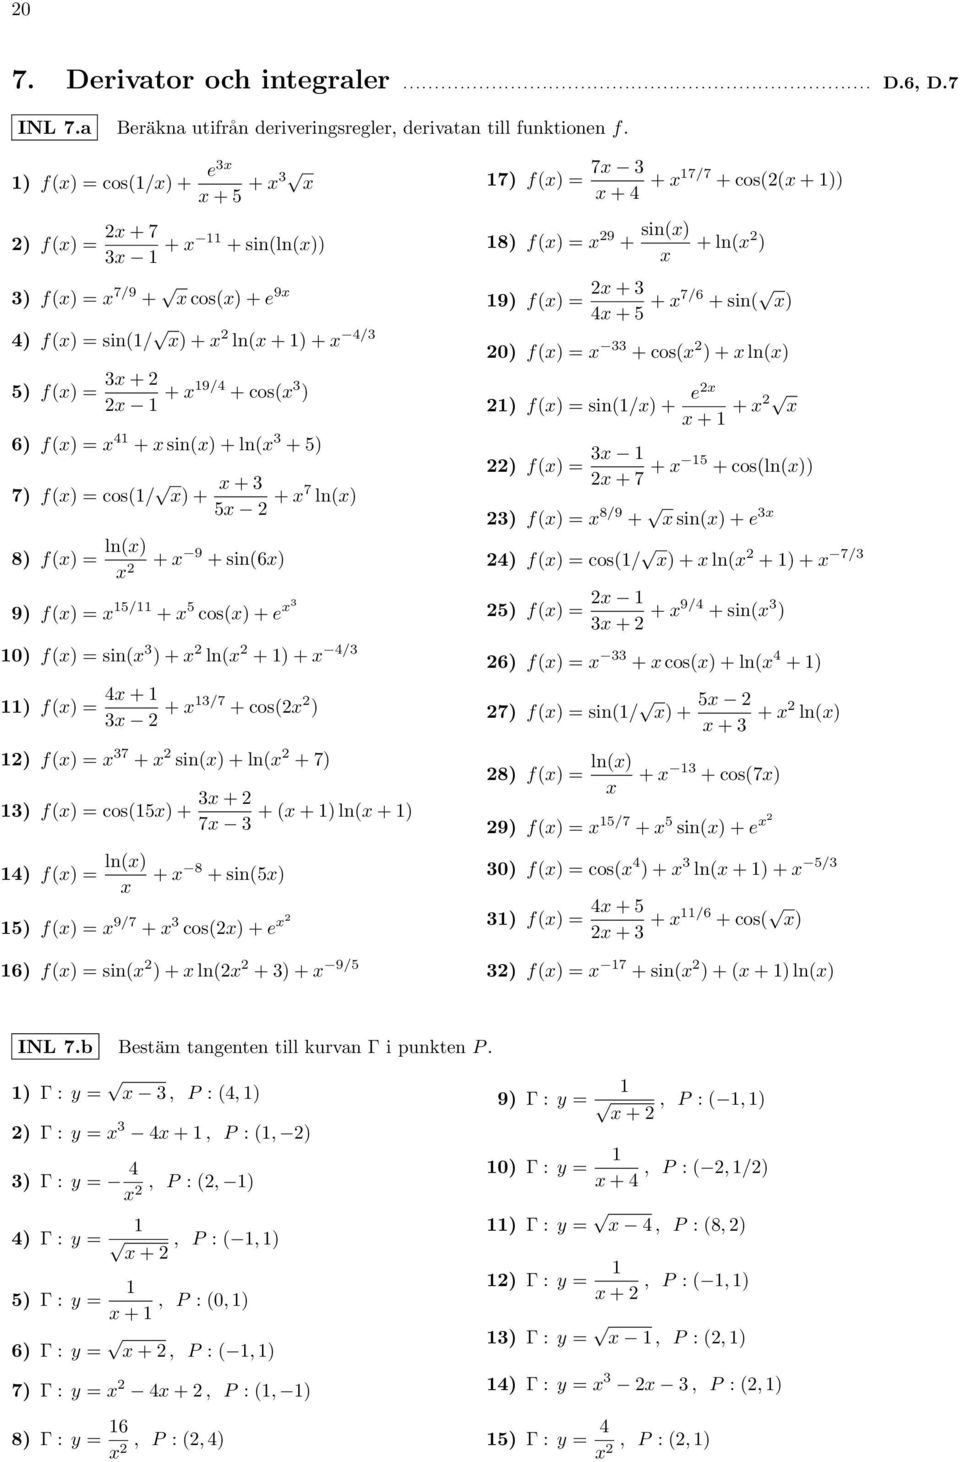 cos/ x) + x + x + x7 lnx) 8) fx) = lnx) x + x 9 + sin6x) 9) fx) = x / + x cosx) + e x 0) fx) = sinx ) + x lnx + ) + x 4/ ) fx) = 4x + x + x/7 + cosx ) ) fx) = x 7 + x sinx) + lnx + 7) ) fx) = cosx) +